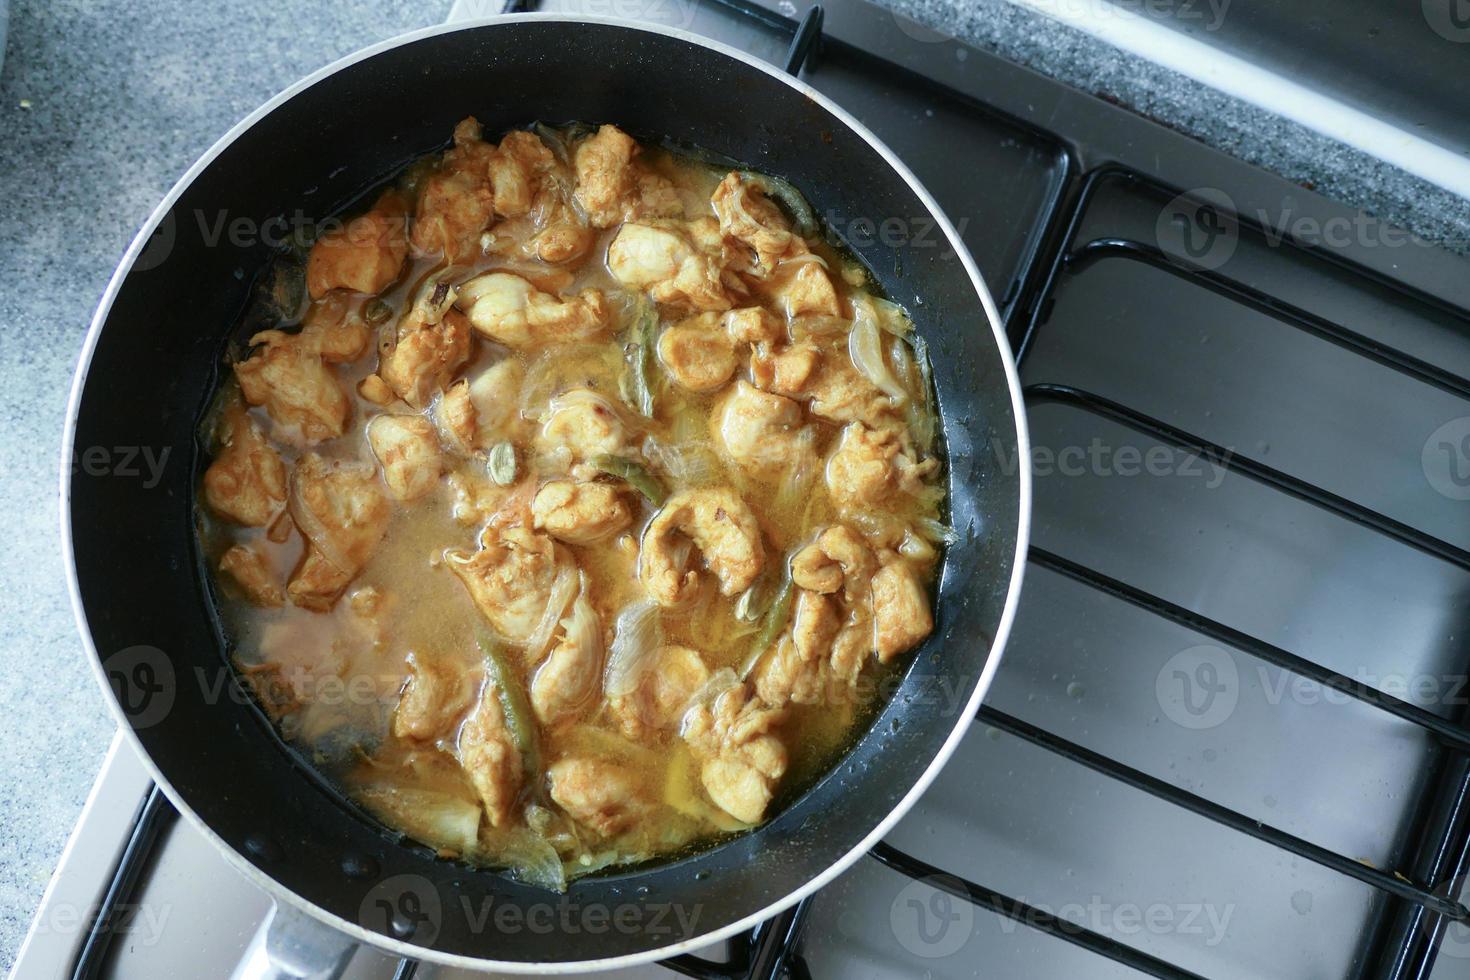 cooking chicken curry in a cooking pan photo